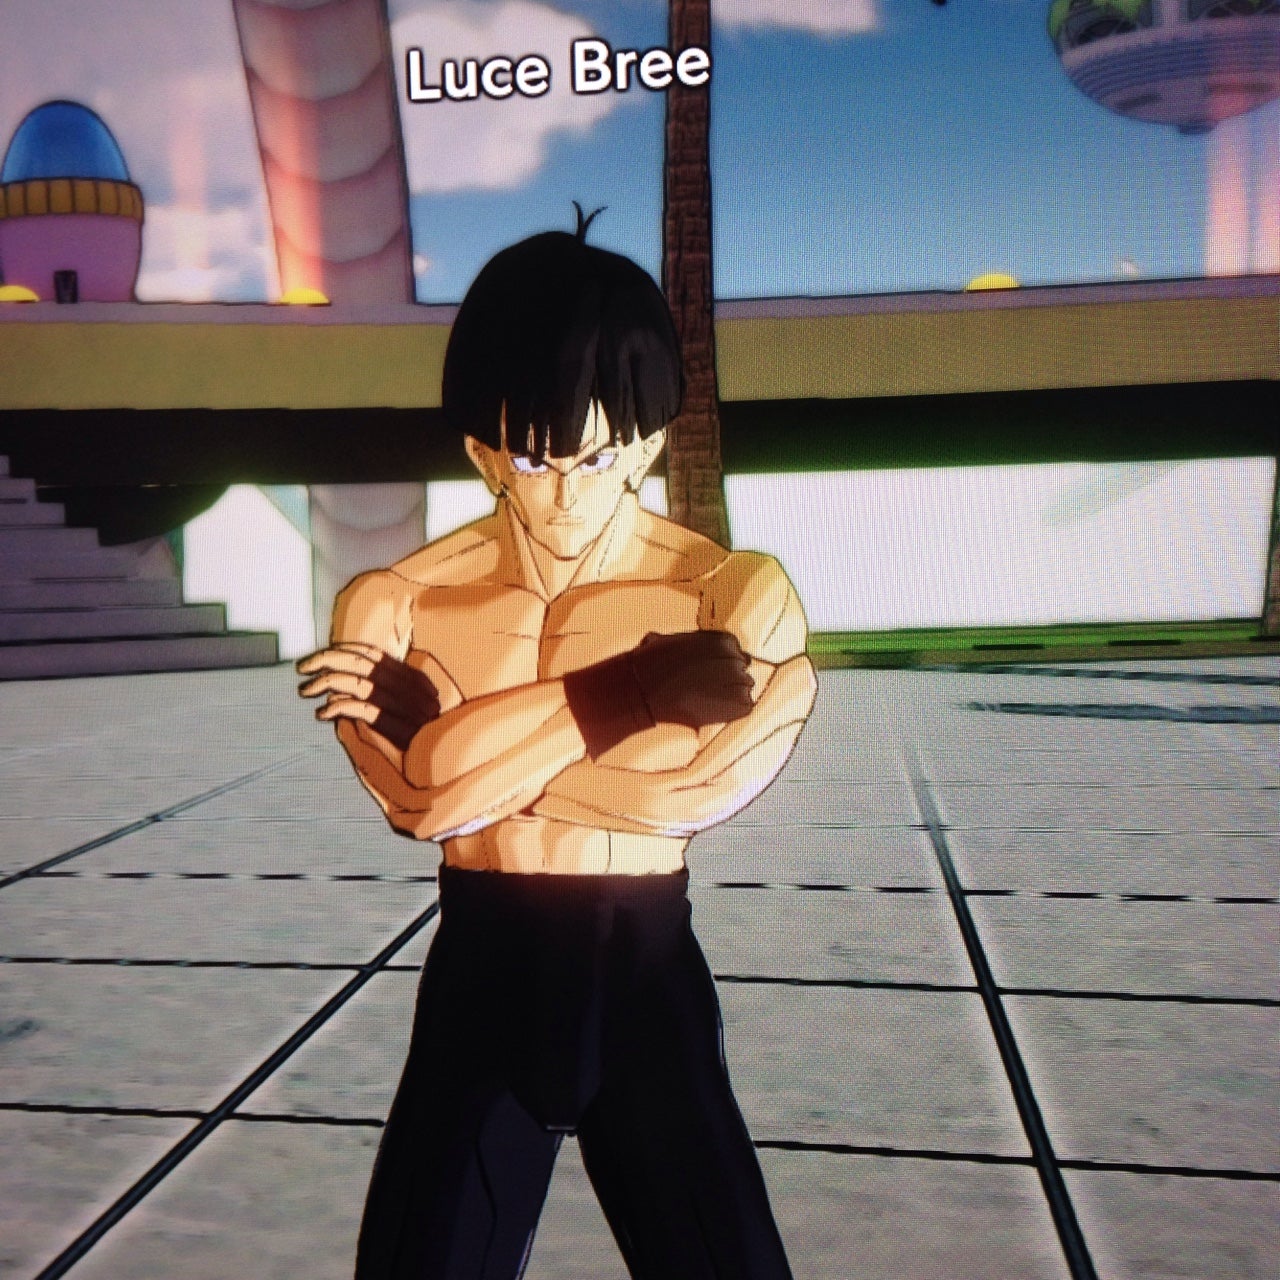 Players Are Making The Best Dragon Ball Xenoverse Characters